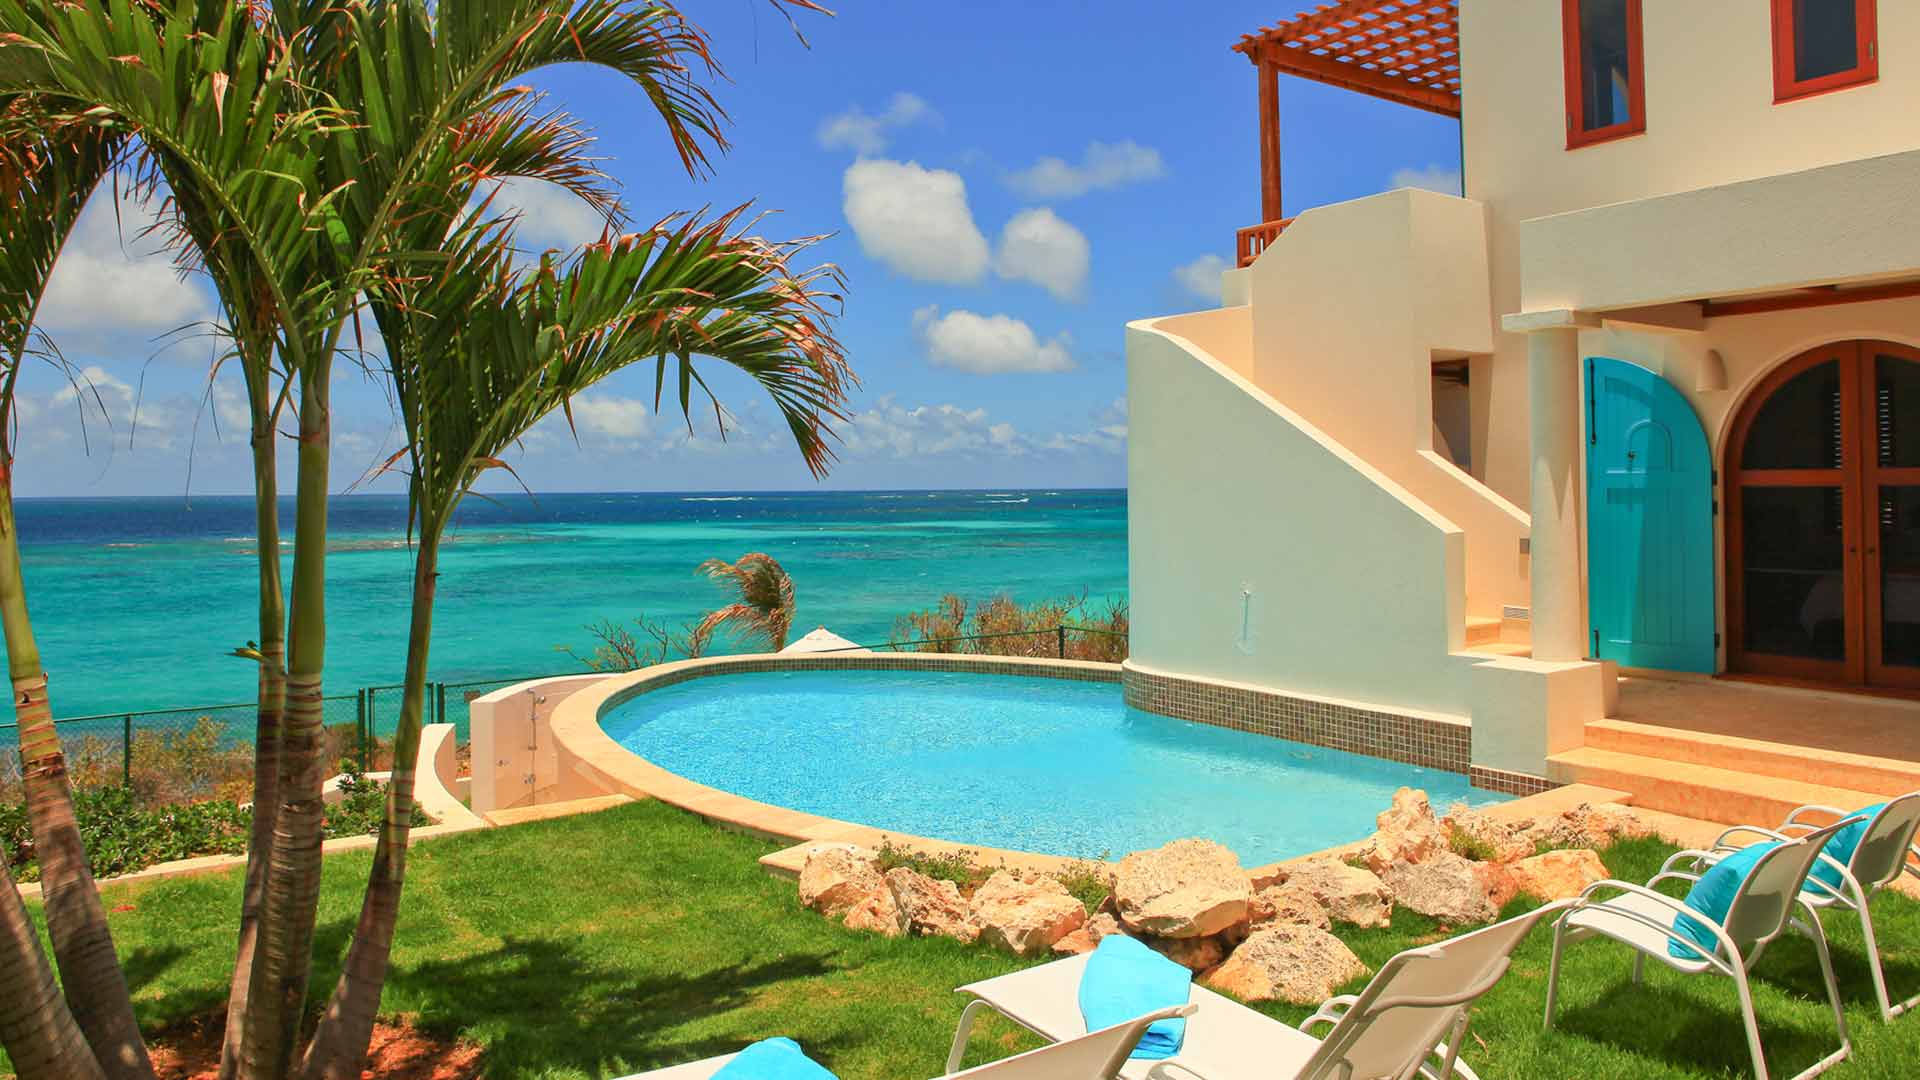 Black Pearl Villa is on Shoal Bay Beach, one of Anguilla's most famous beaches.